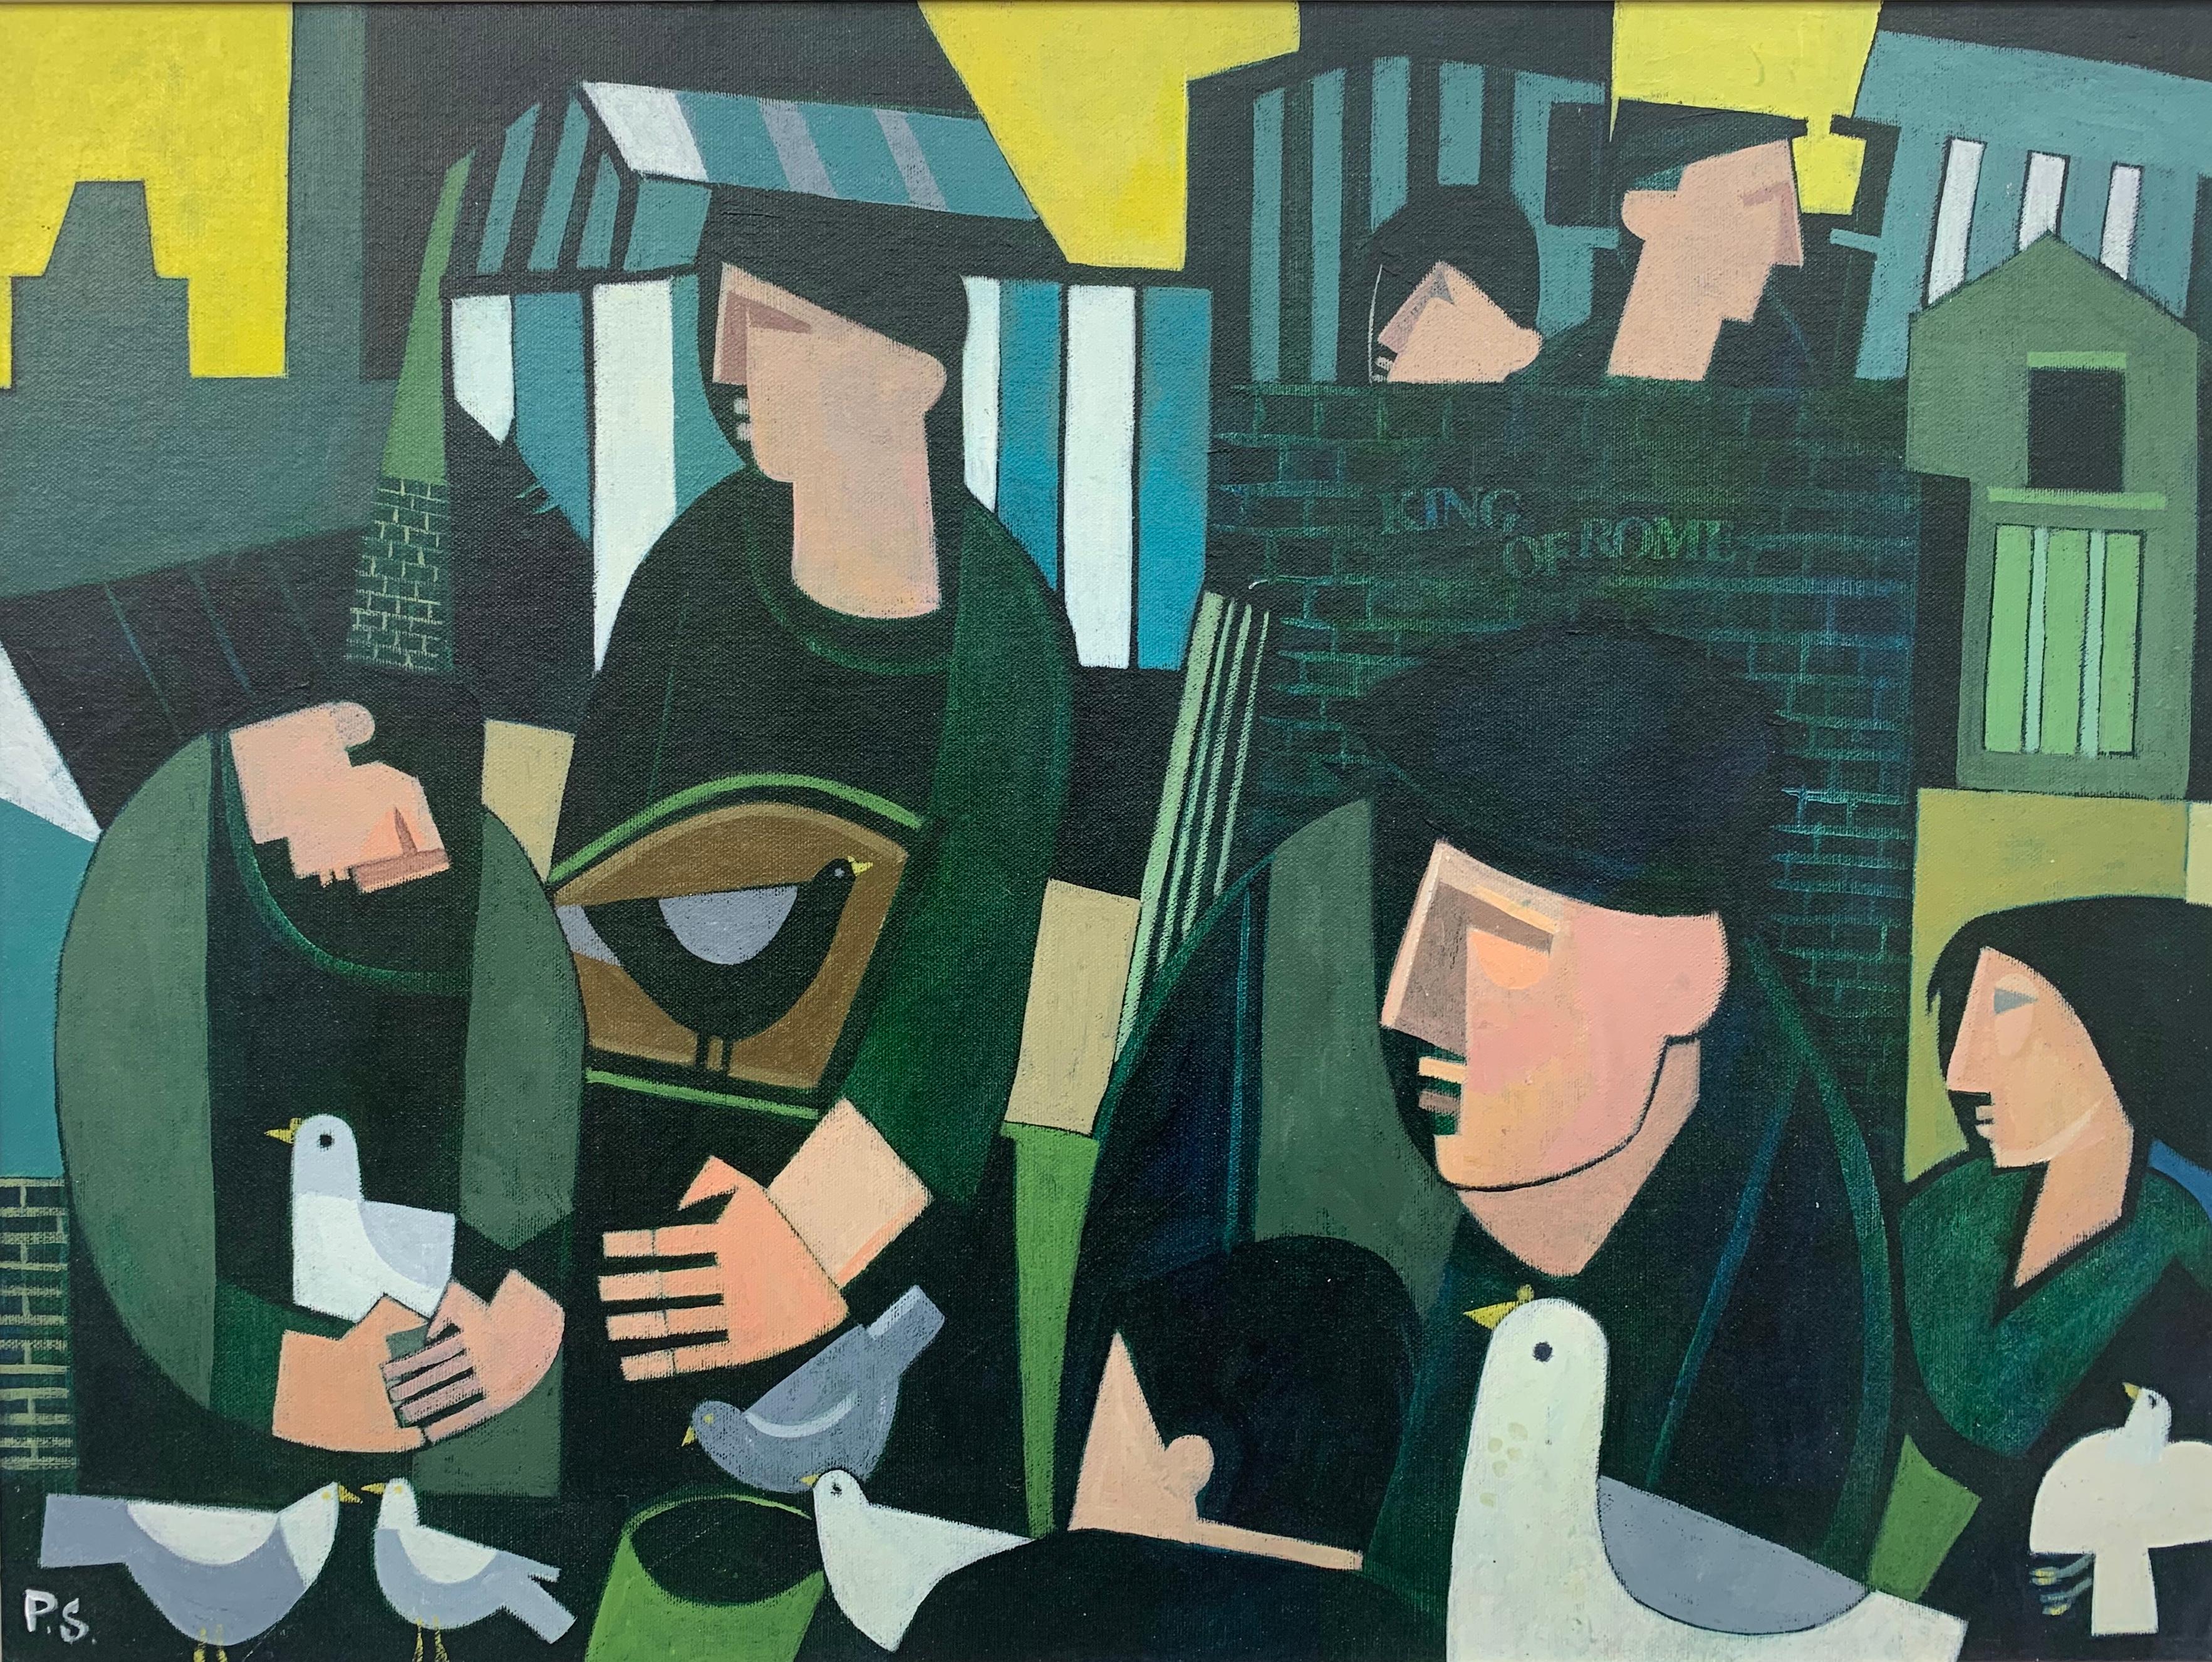 Pigeons Male Figures Portraits King of Rome by Northern School British Artist - Beige Figurative Painting by Peter Stanaway